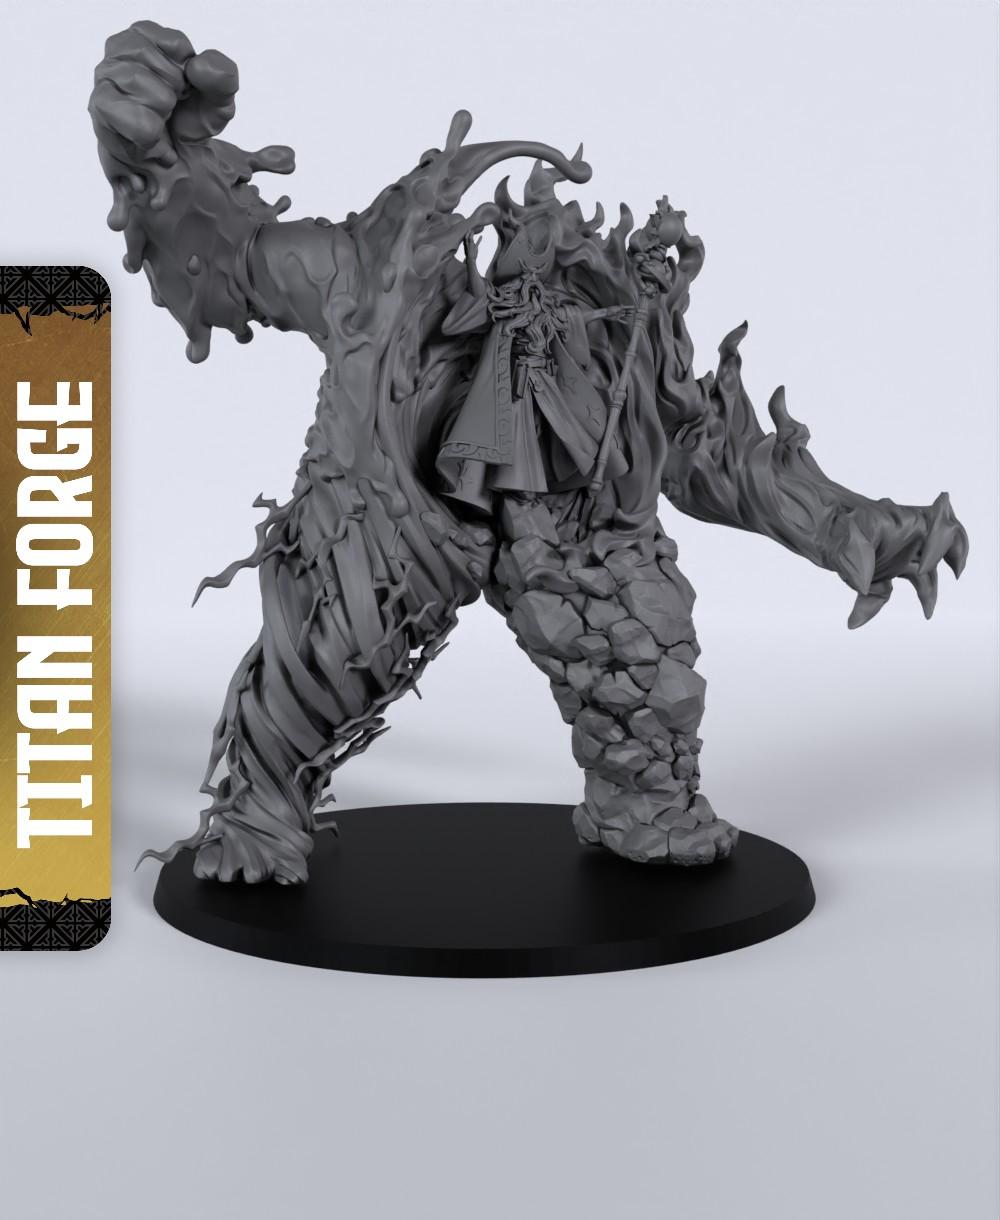 Elemental Walker - With Free Dragon Warhammer - 5e DnD Inspired for RPG and Wargamers 3d model